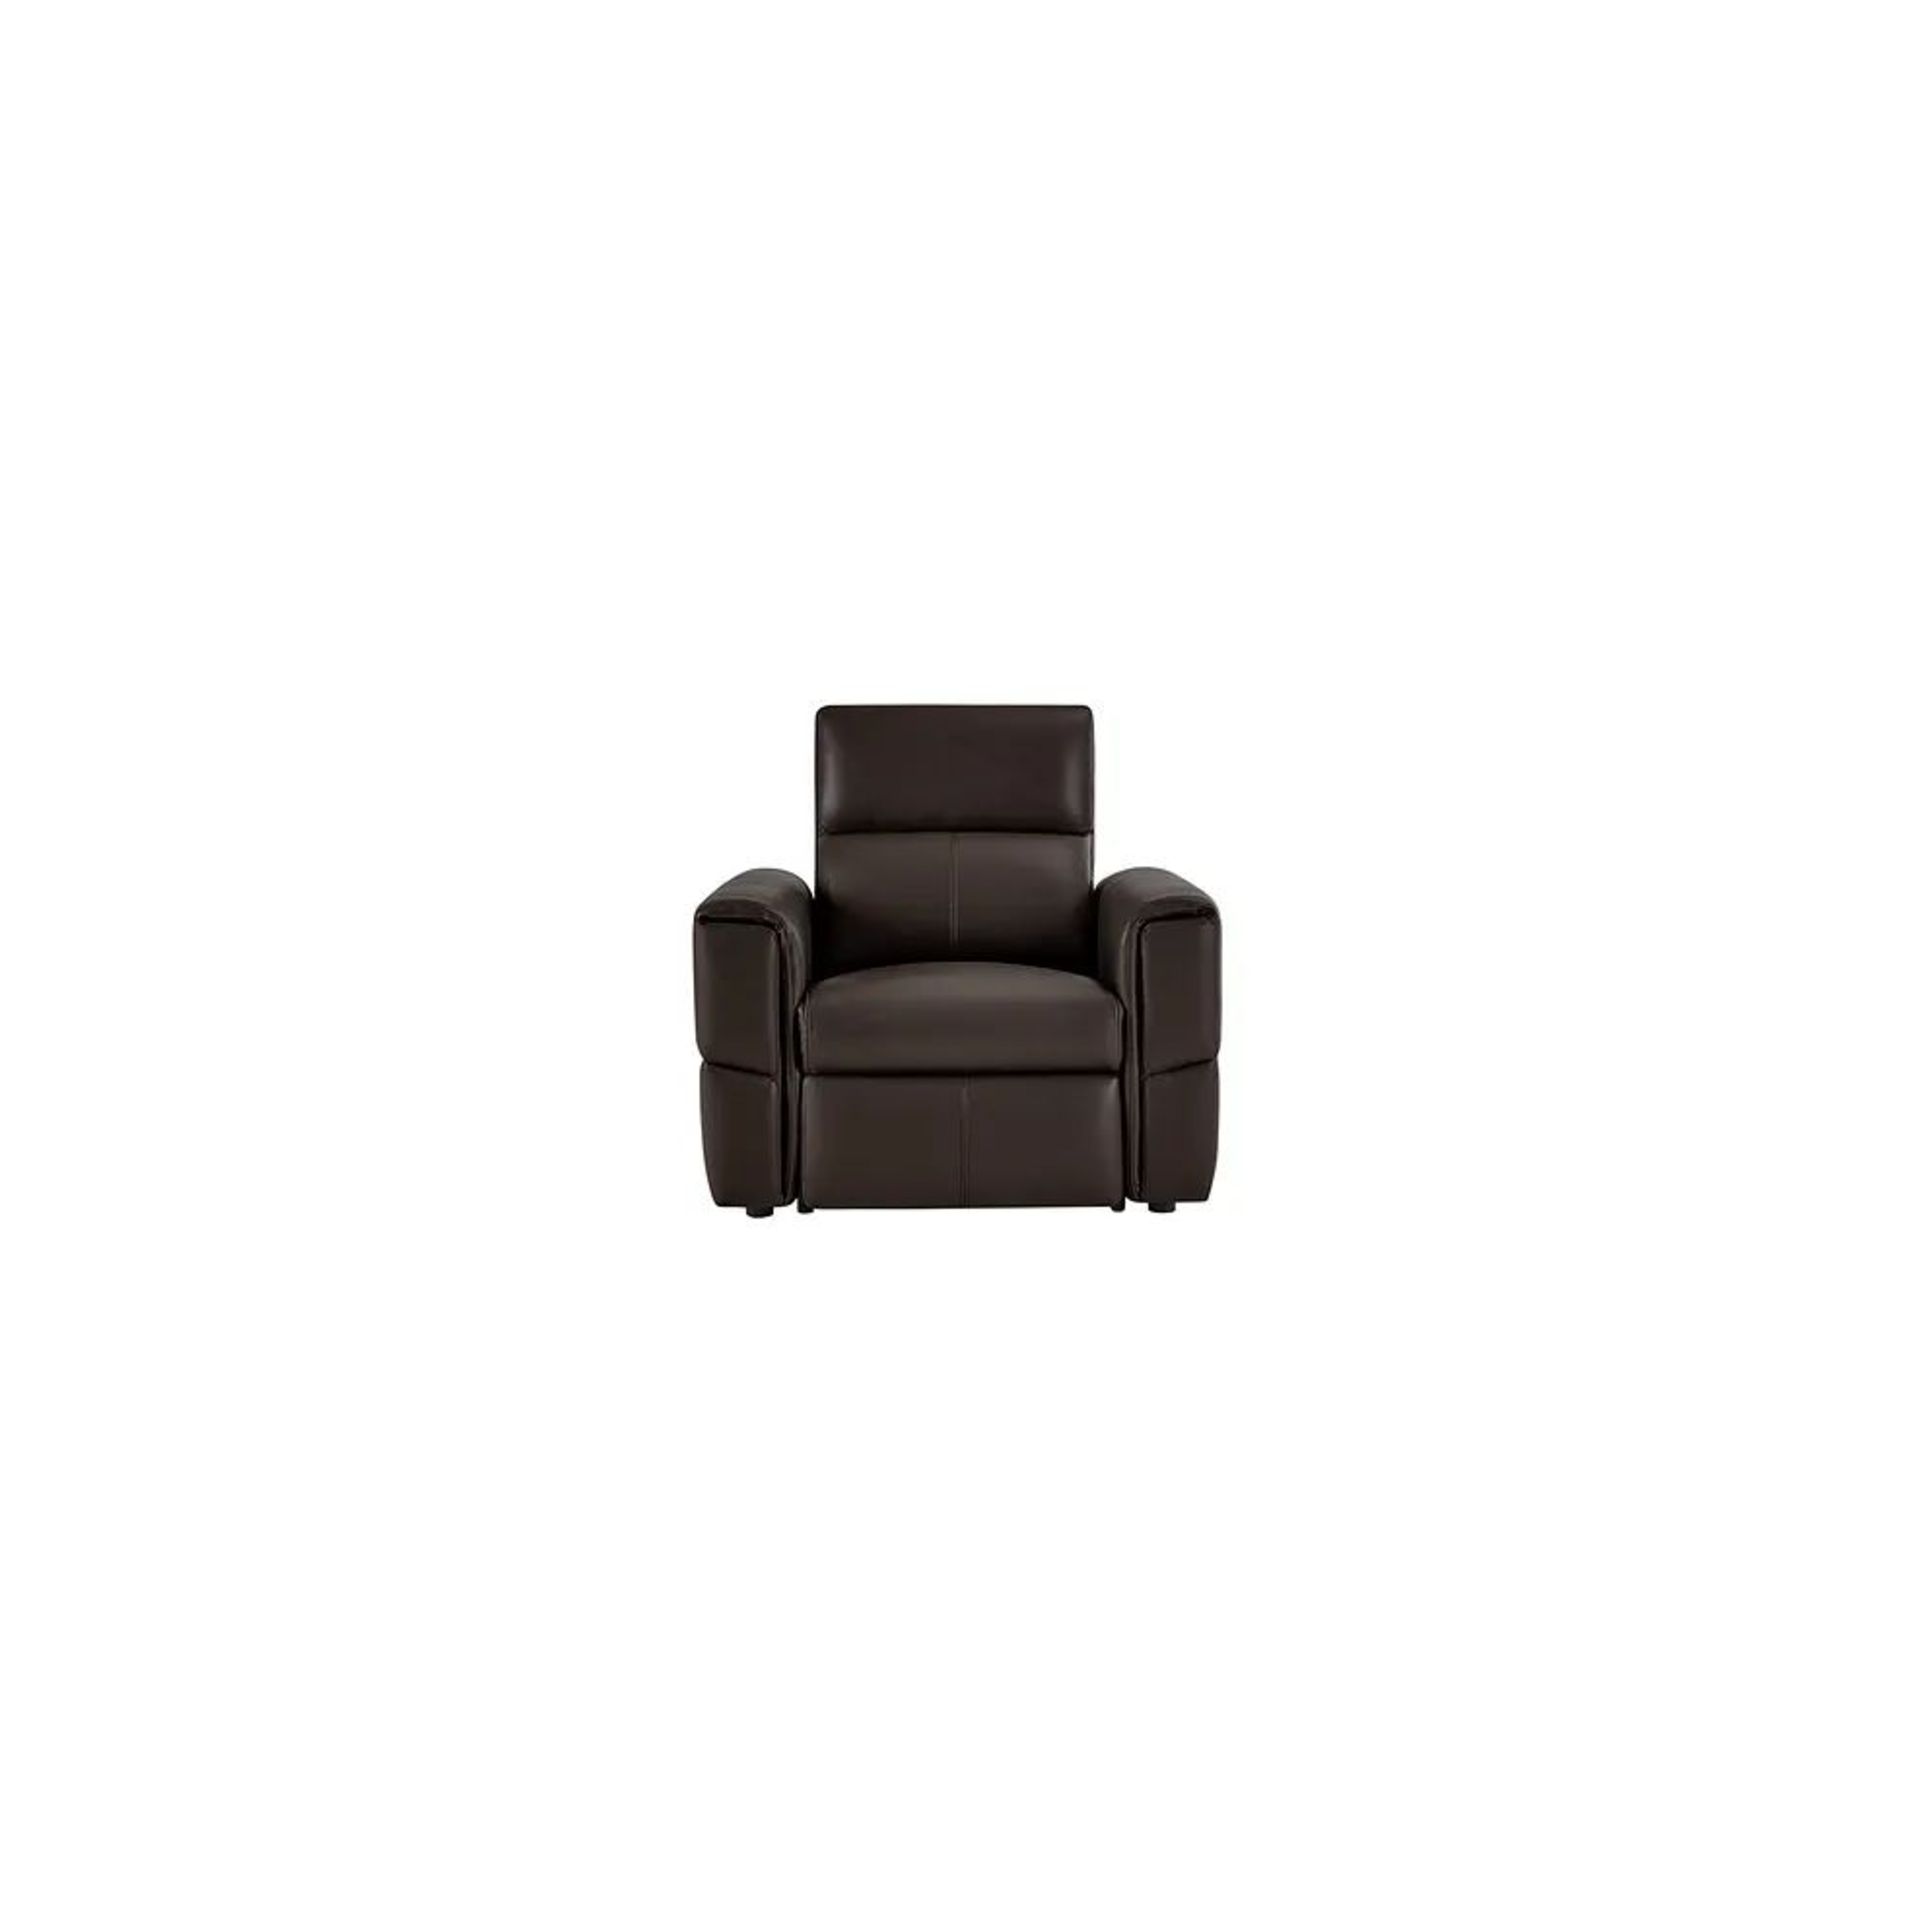 BRAND NEW SAMSON Electric Recliner Armchair - TWO TONE BROWN LEATHER. RRP £1249. Showcasing neat, - Image 2 of 9